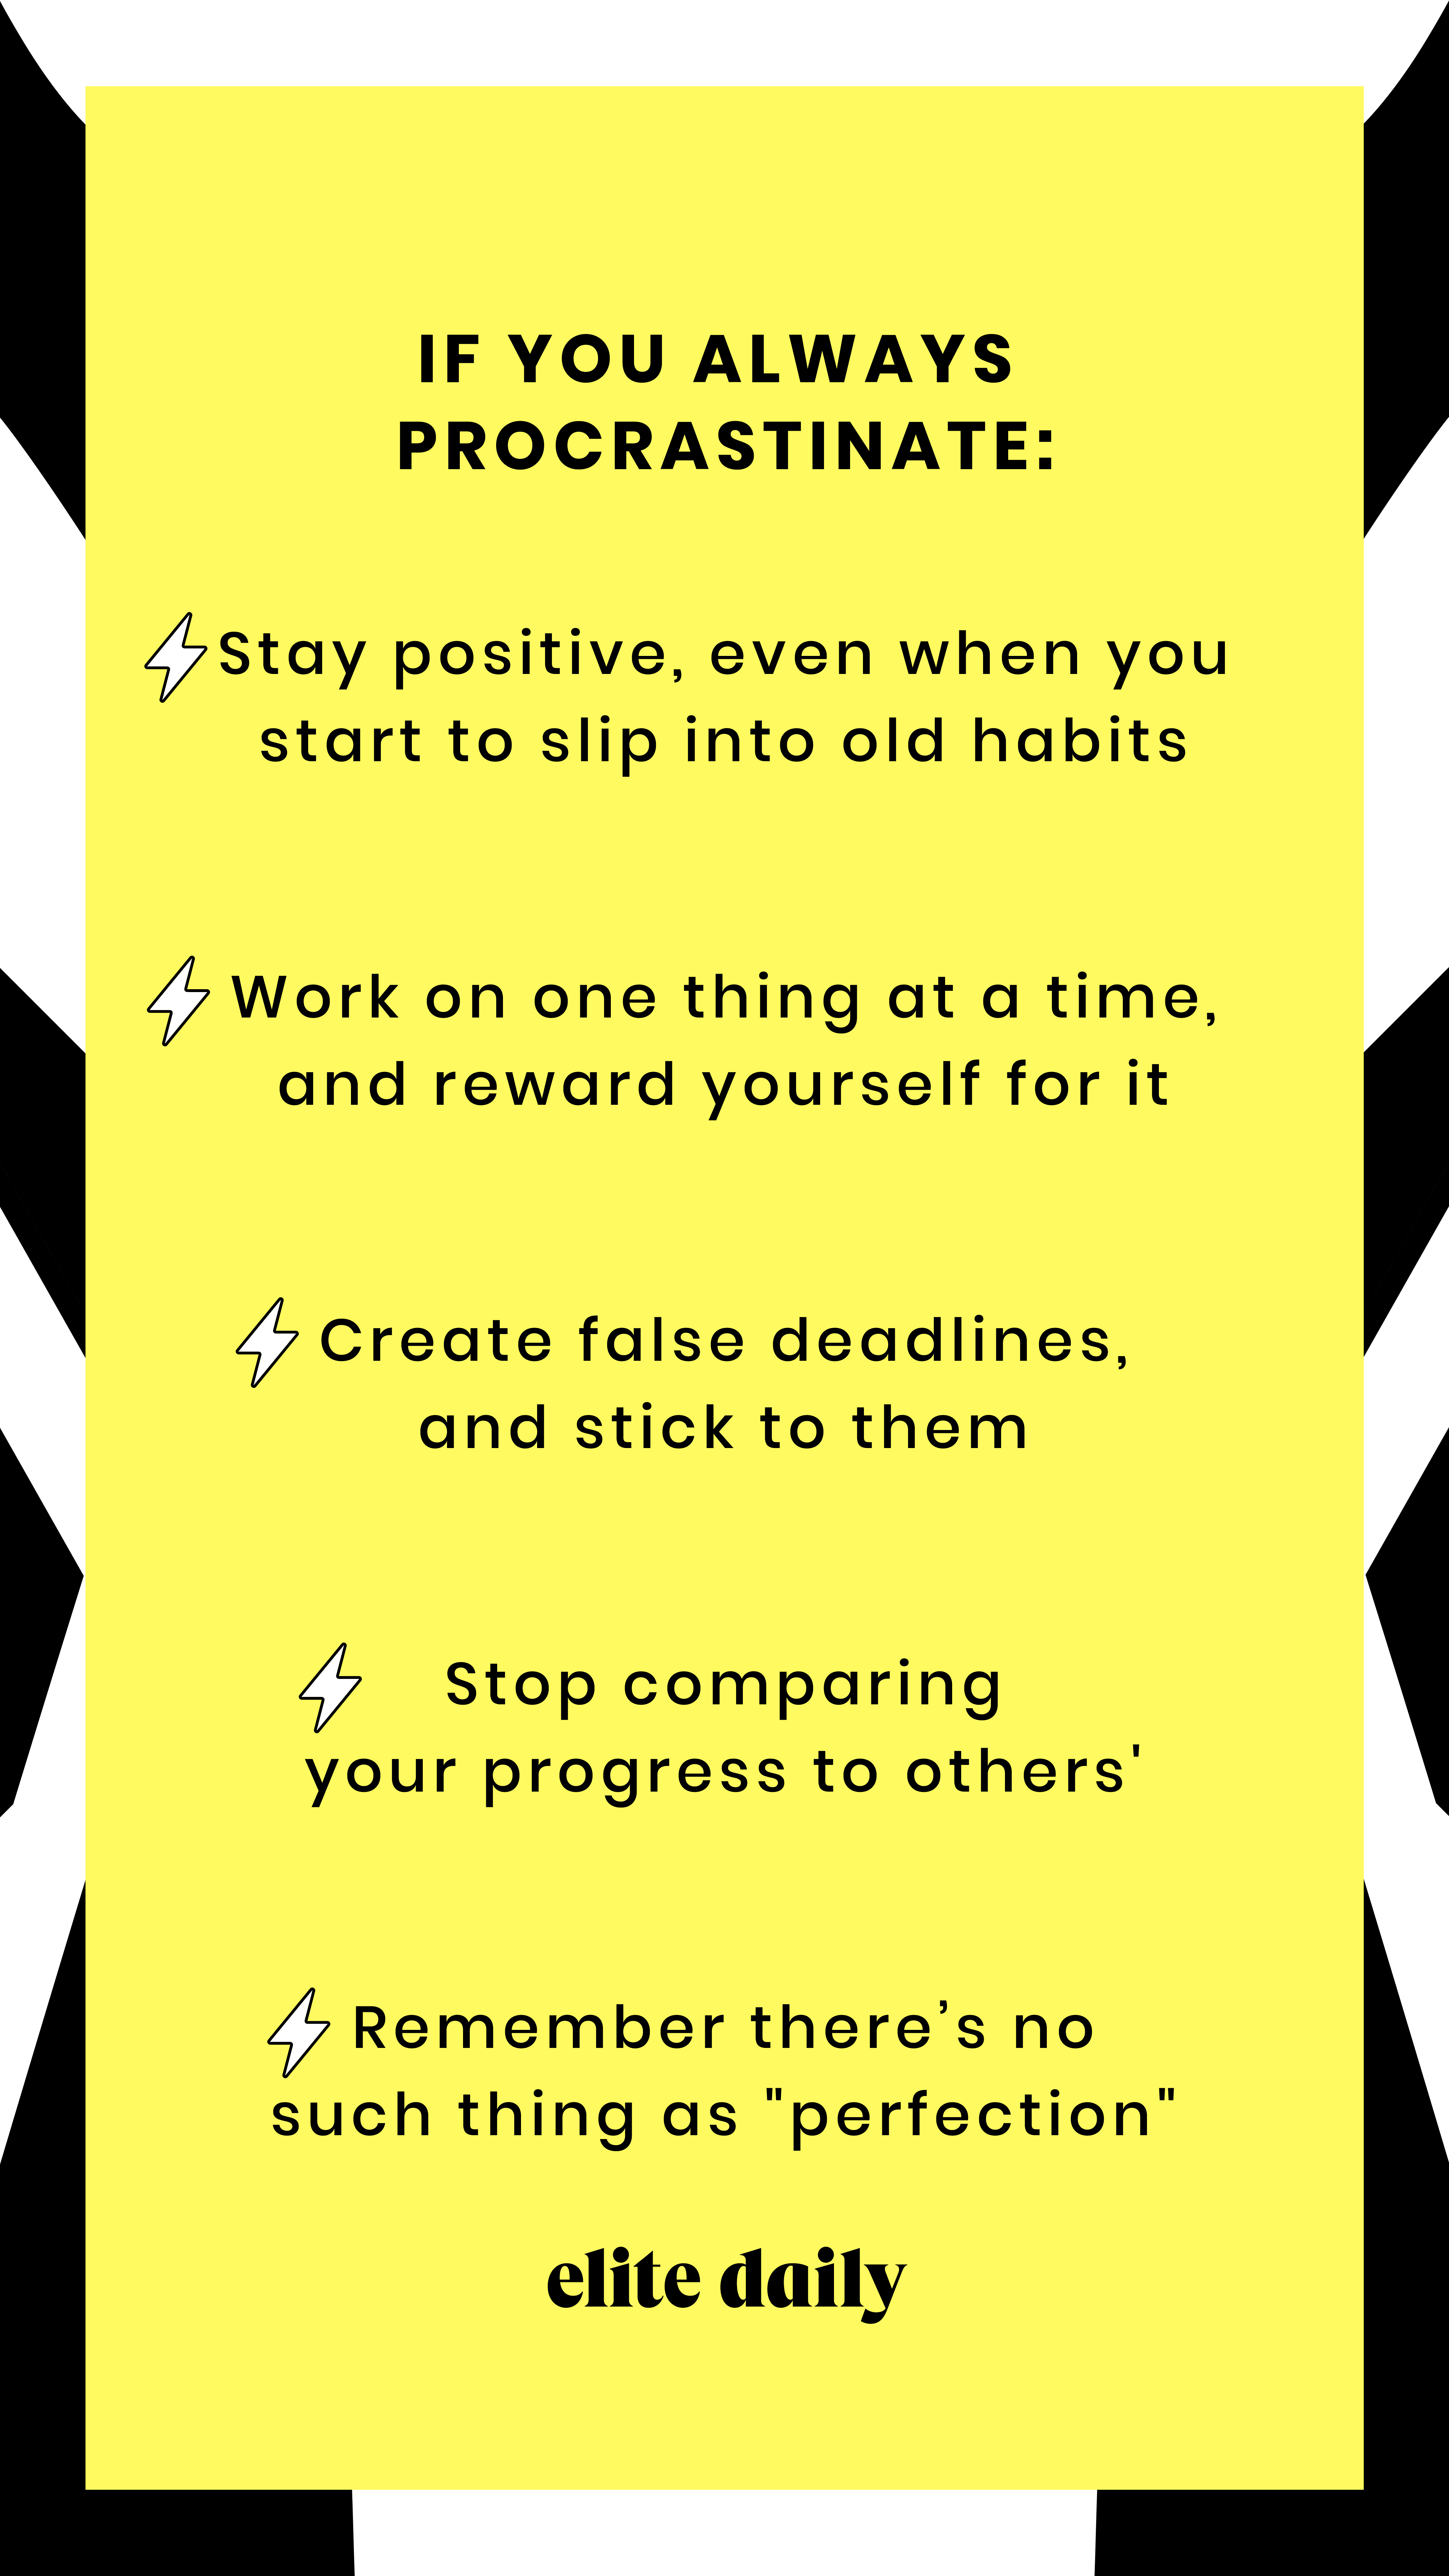 how to organize your life and put priorities in perspective